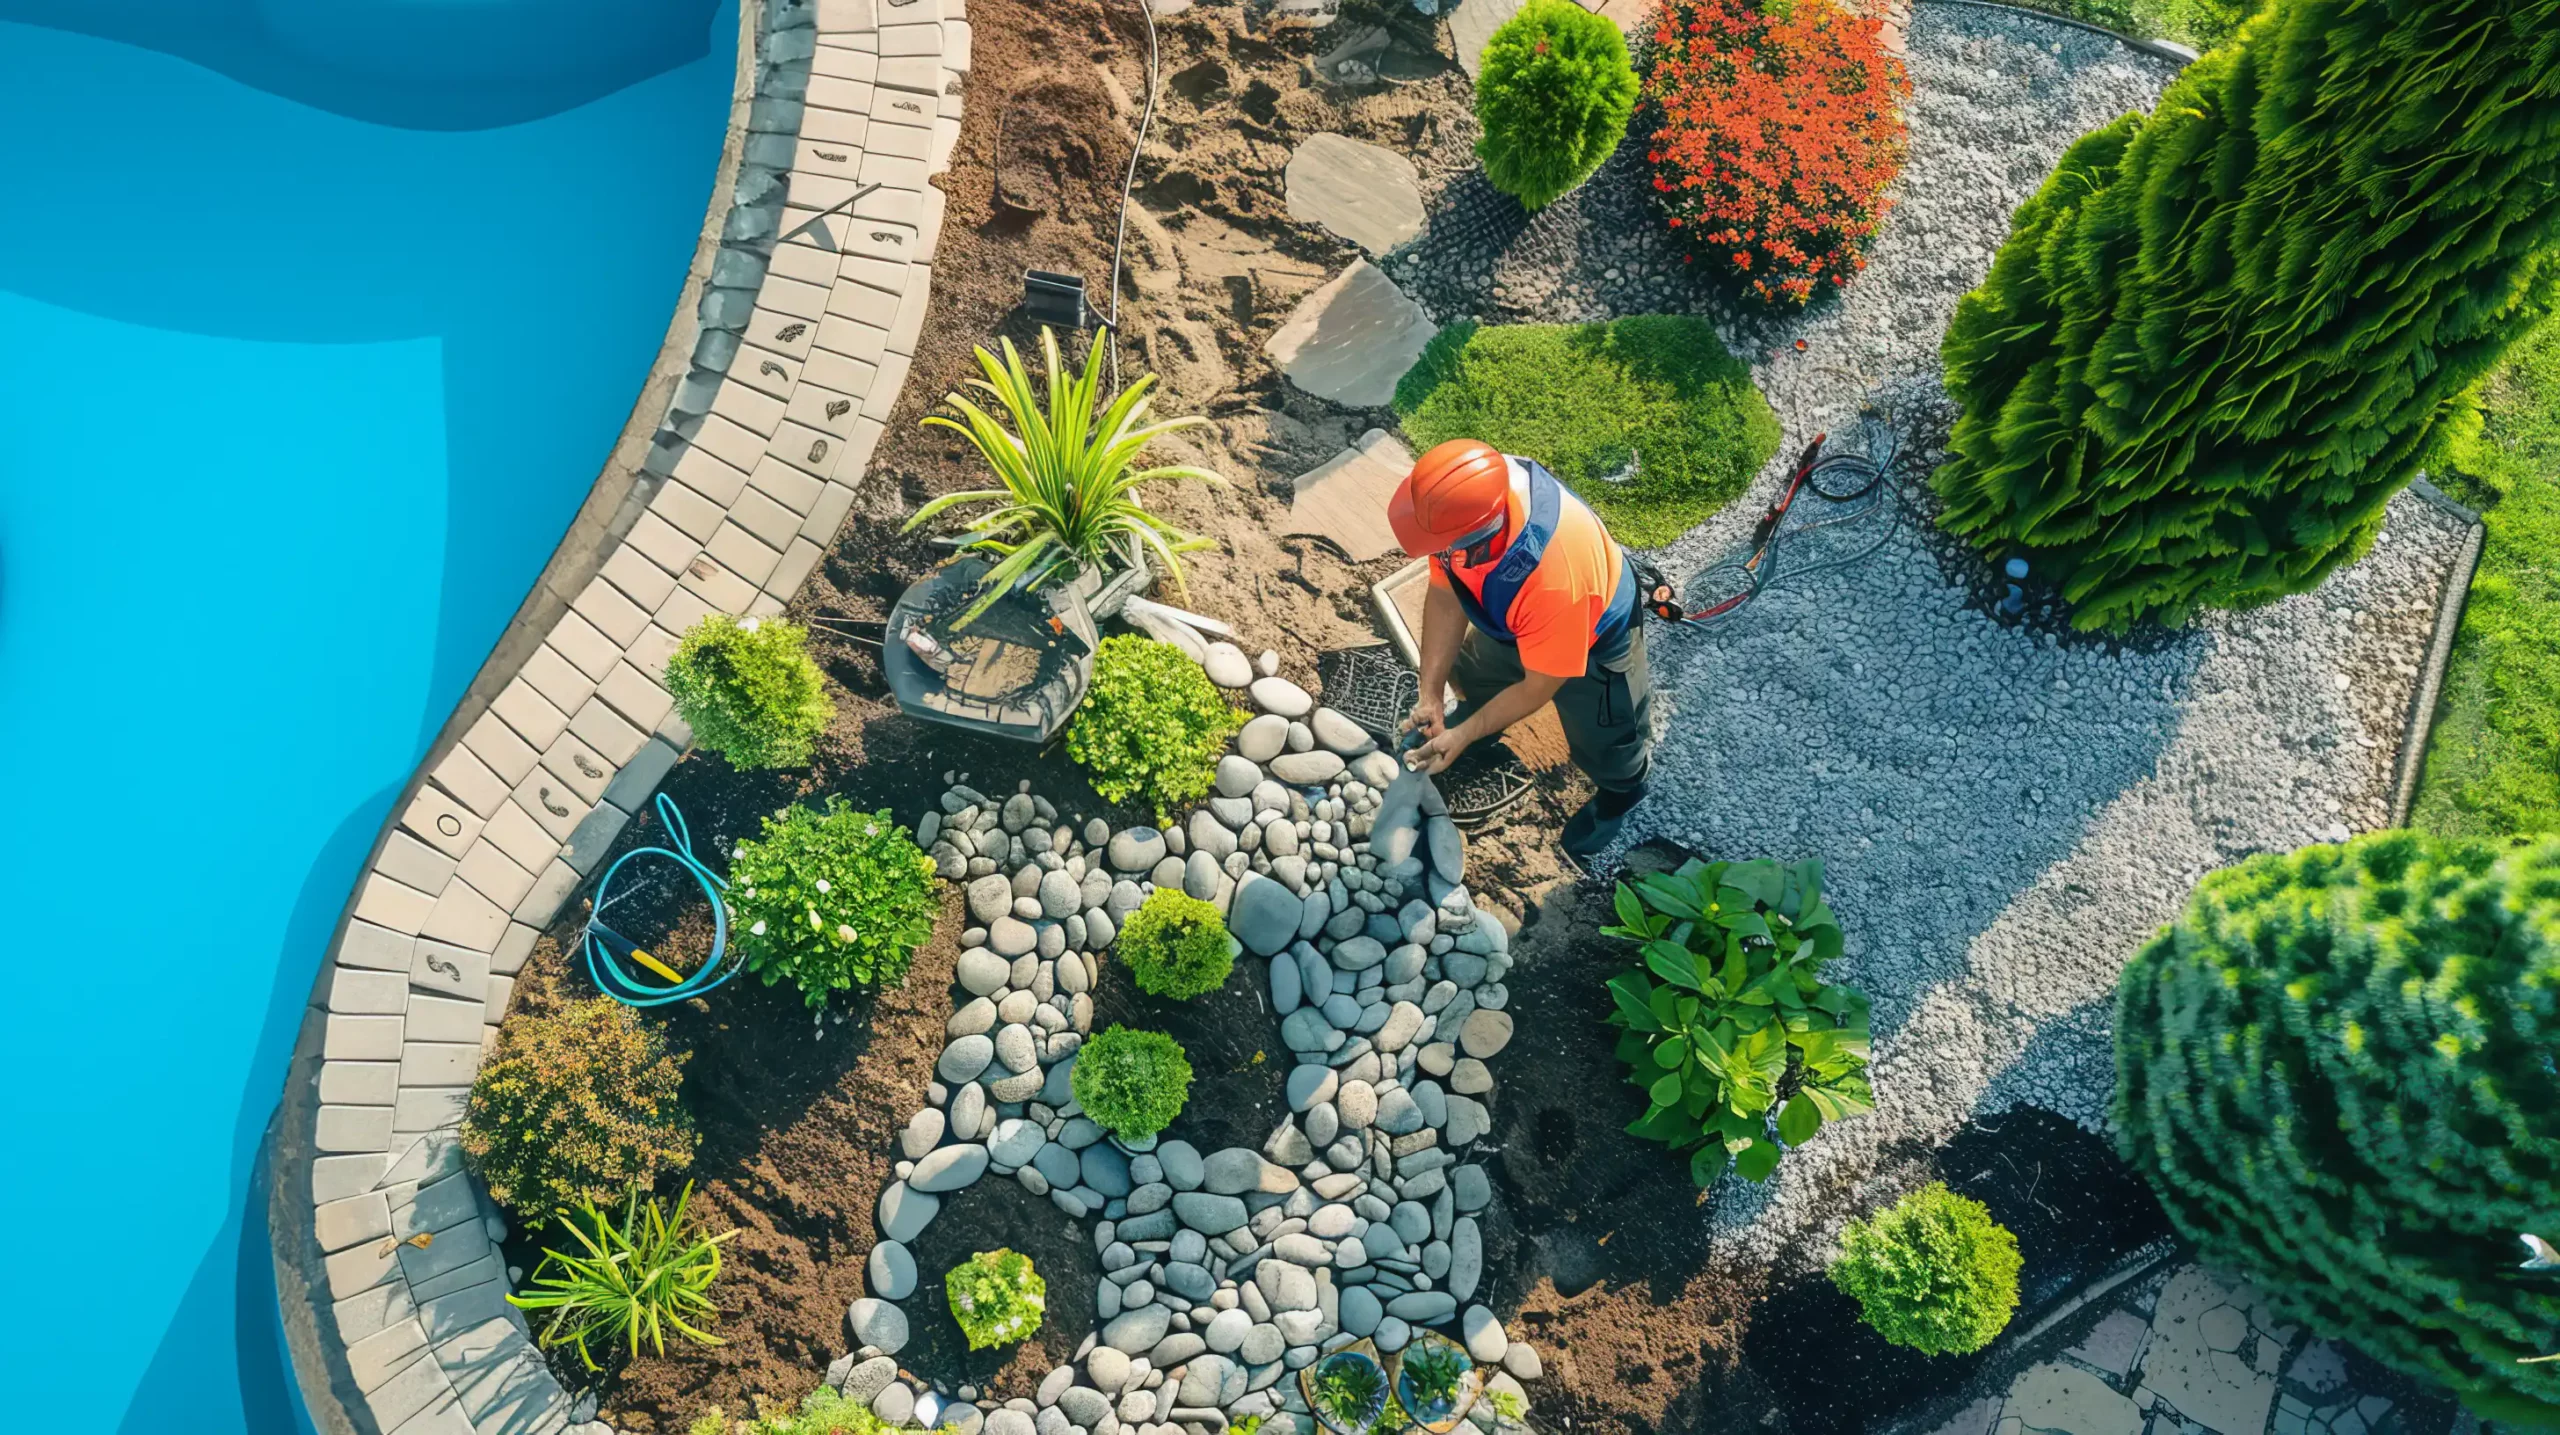 Professional_Landscaping_in_Action3